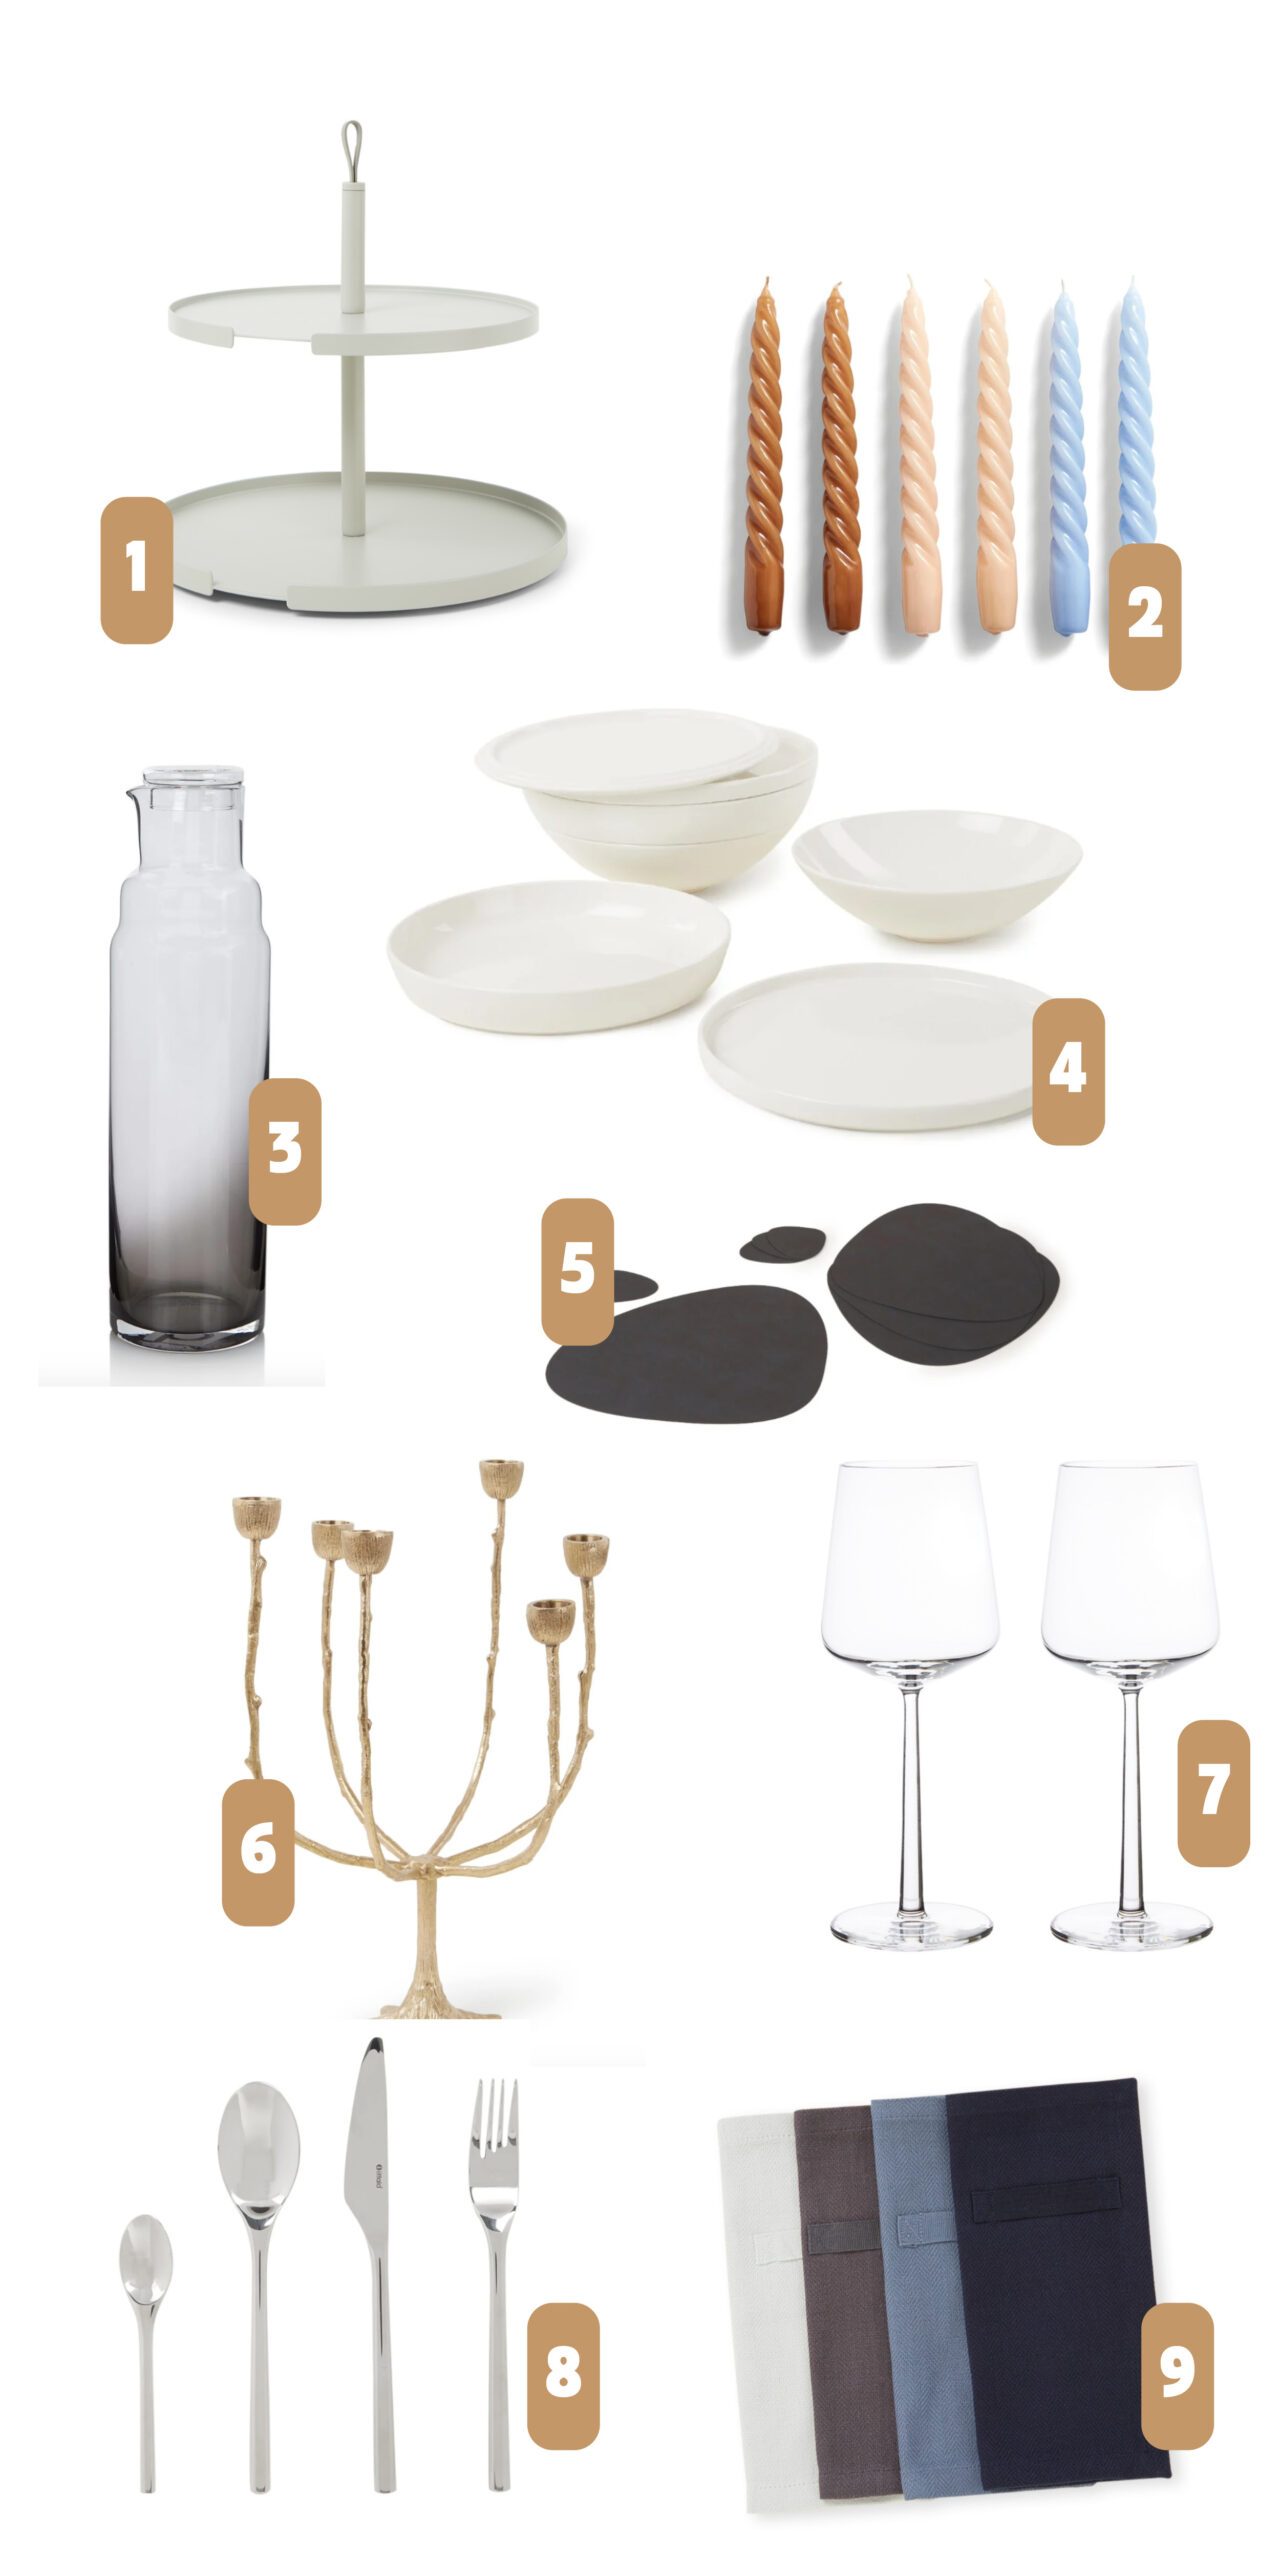 Glasses dishes cutlery beautiful basics for your table - Glasses, dishes, cutlery - beautiful basics for your table